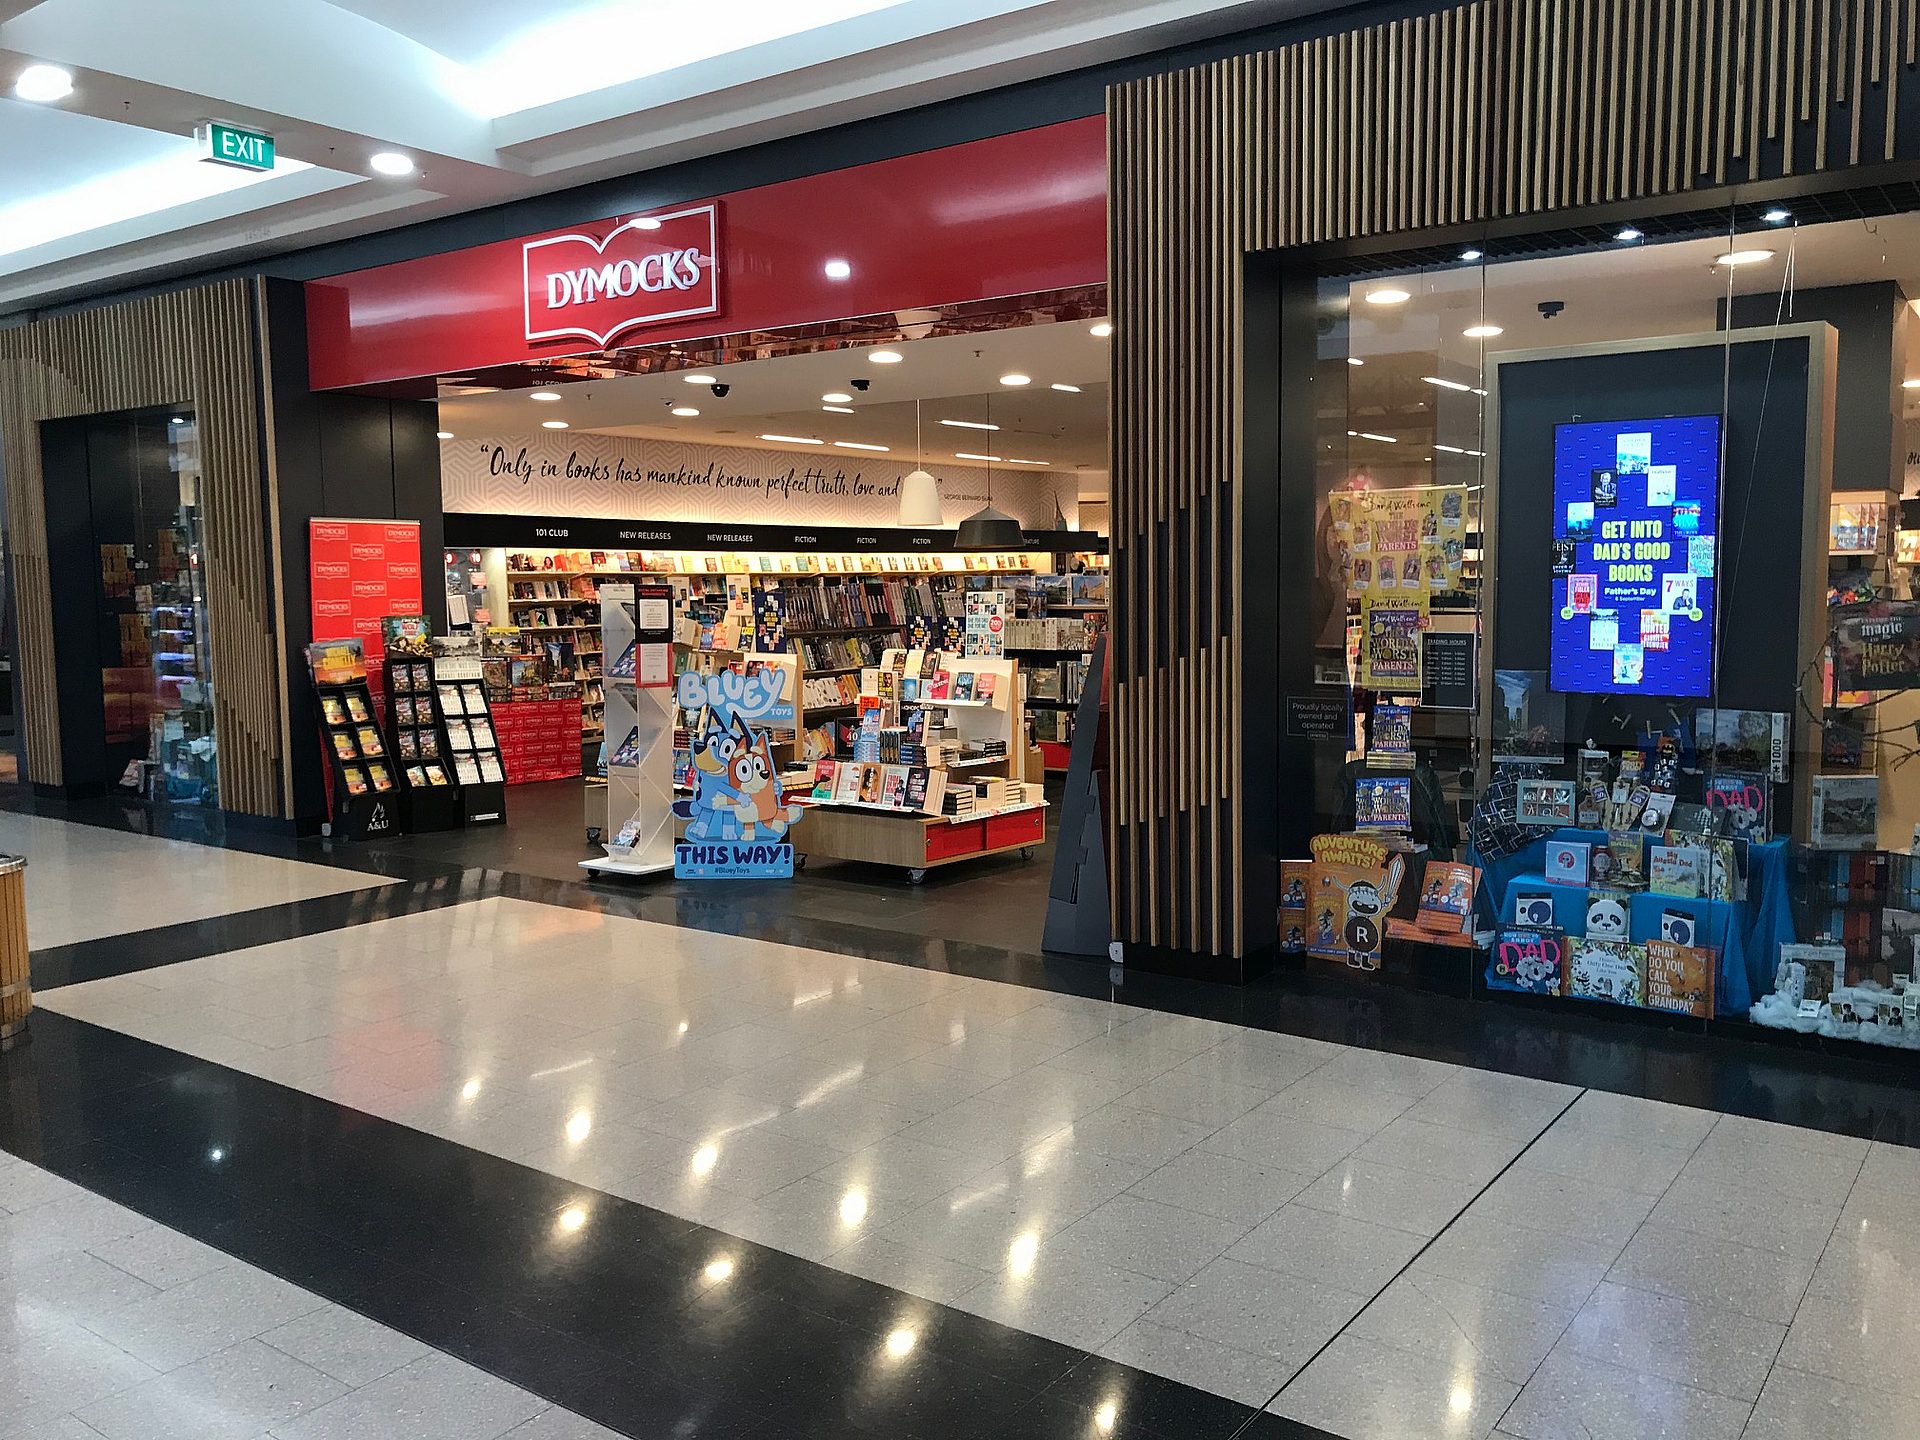 Dymocks data breach confirmed: What to do now?